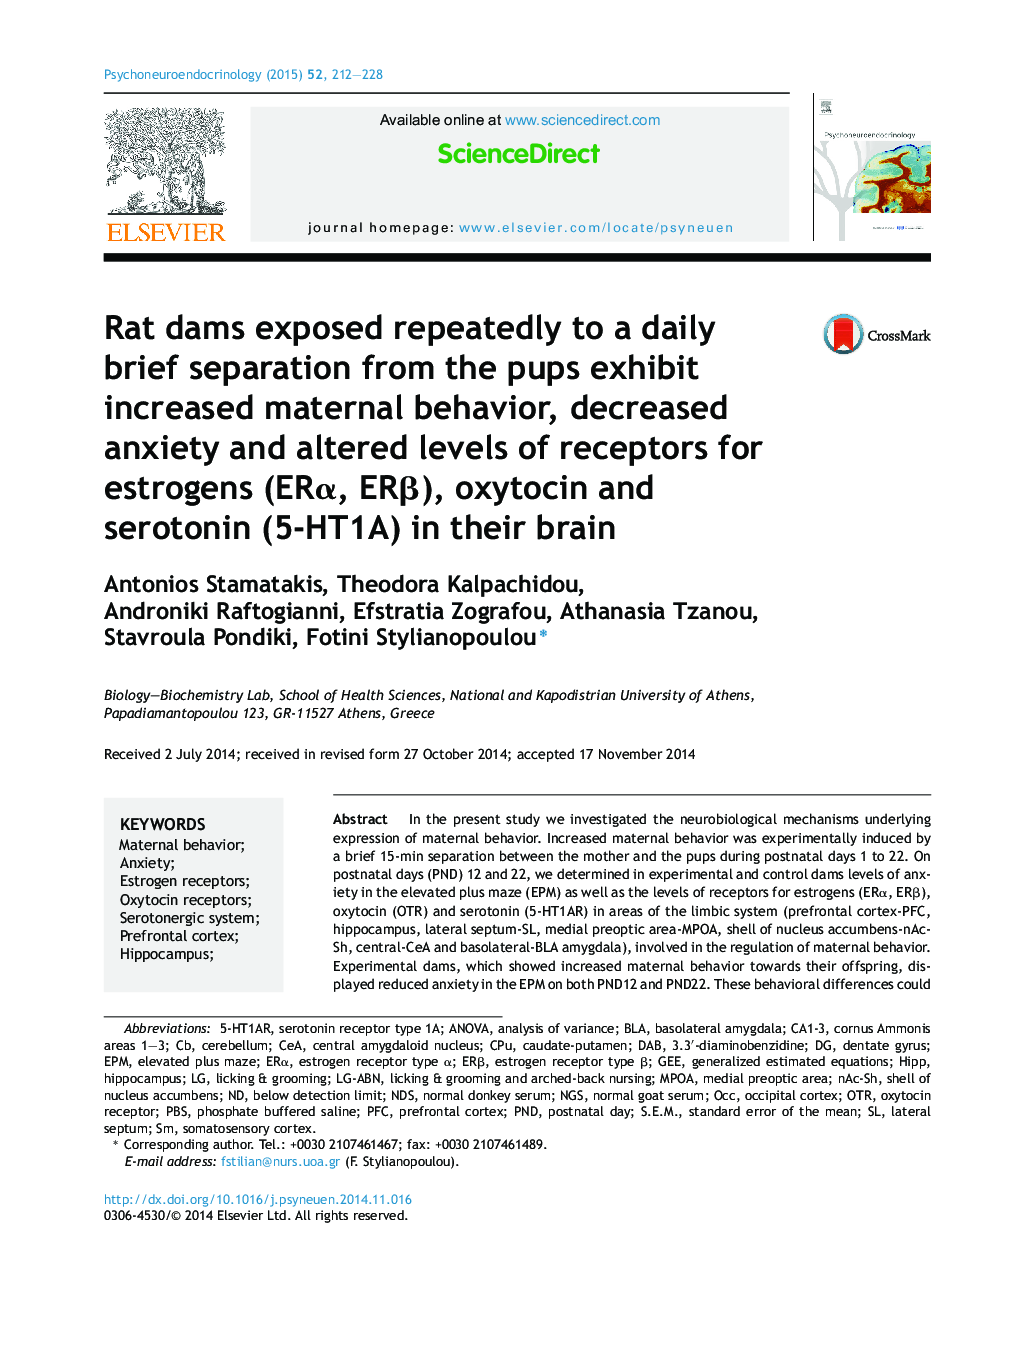 Rat dams exposed repeatedly to a daily brief separation from the pups exhibit increased maternal behavior, decreased anxiety and altered levels of receptors for estrogens (ERÎ±, ERÎ²), oxytocin and serotonin (5-HT1A) in their brain